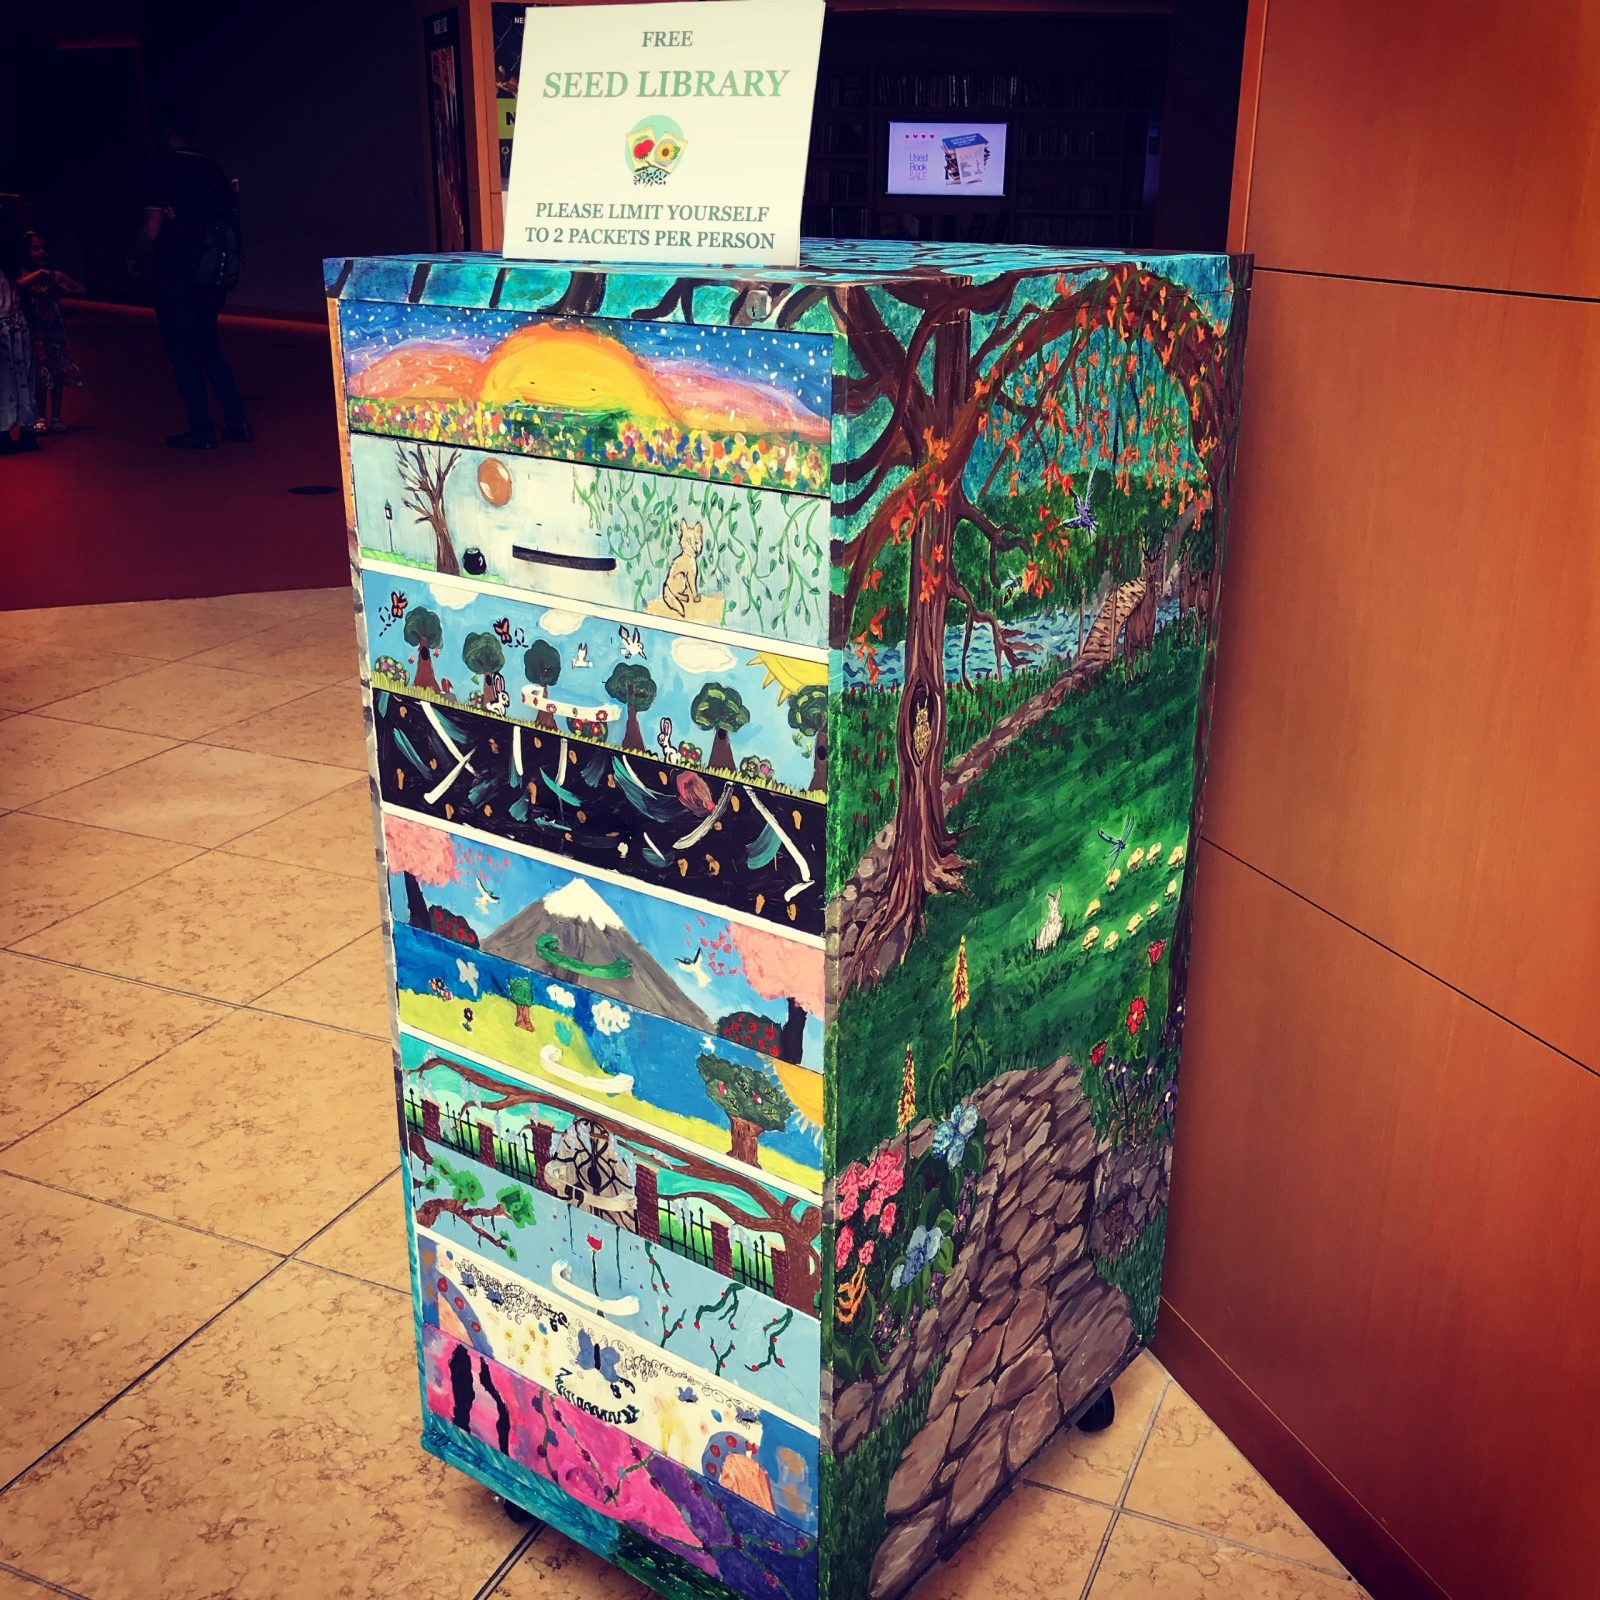 Seed Library at Slover Library